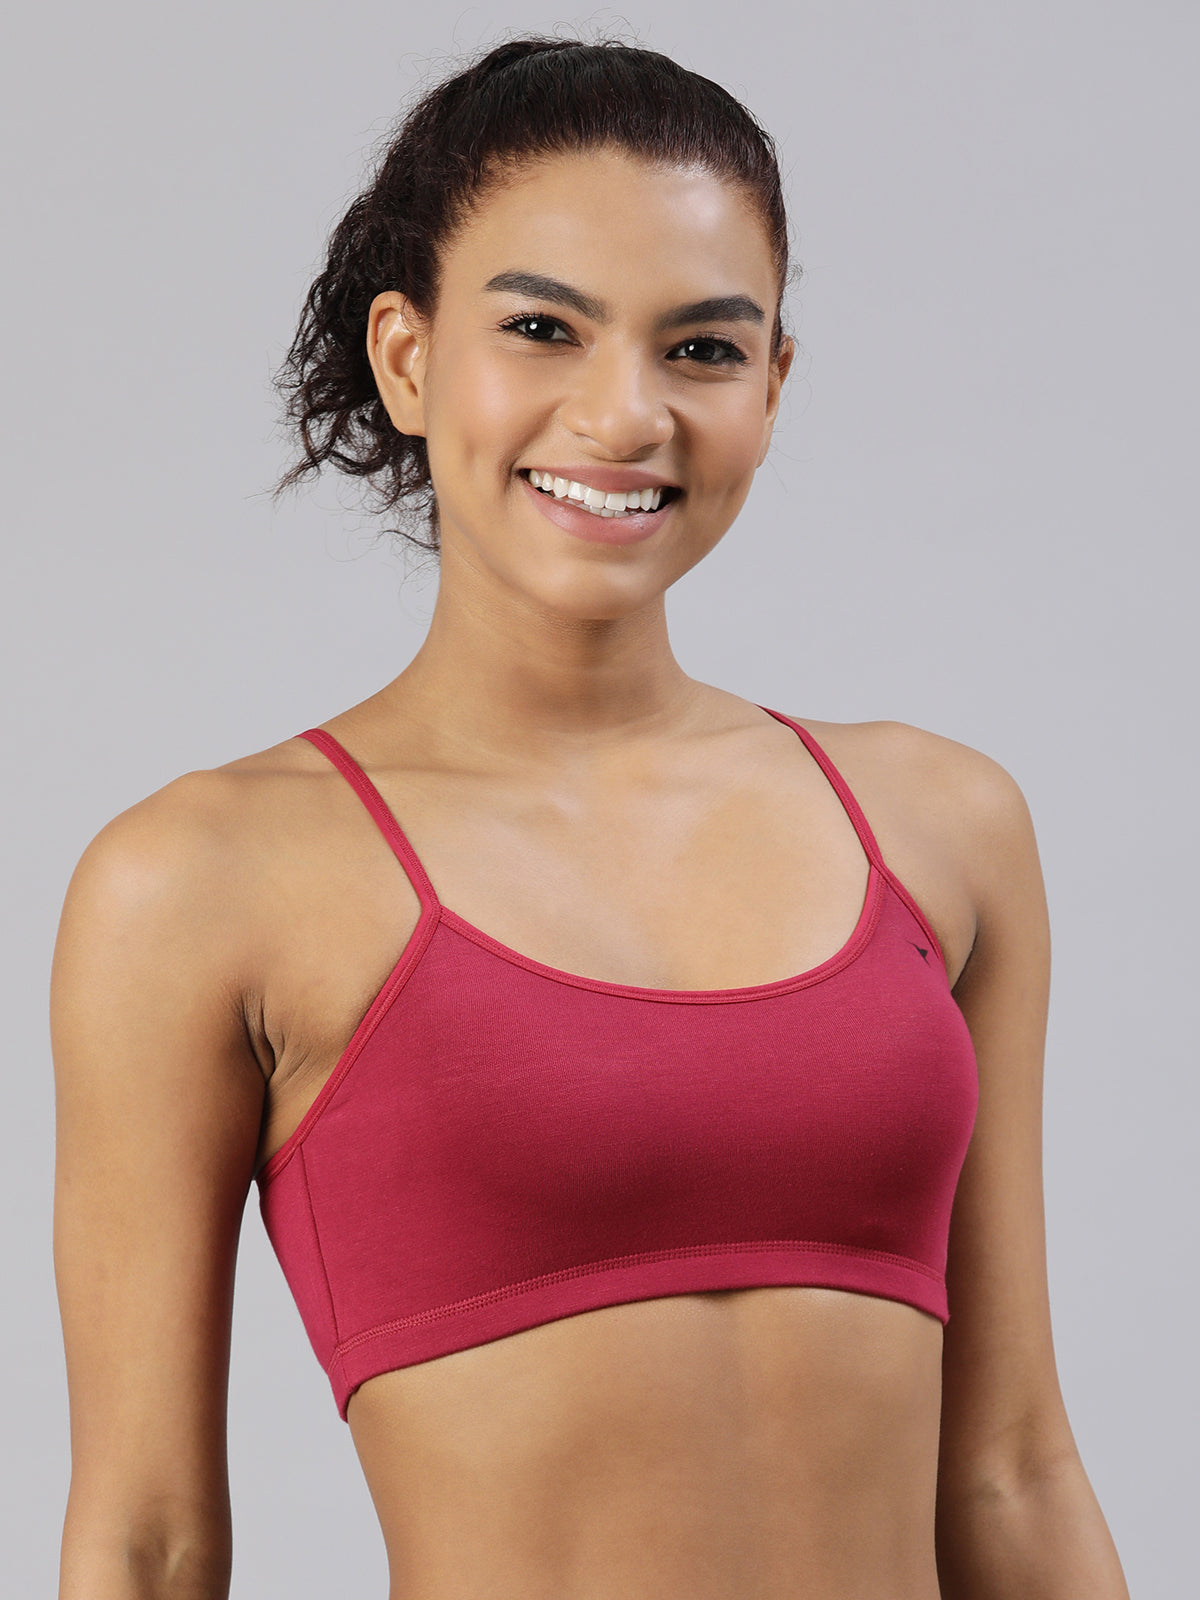 blossom-starters bra-red wine4-teen collection